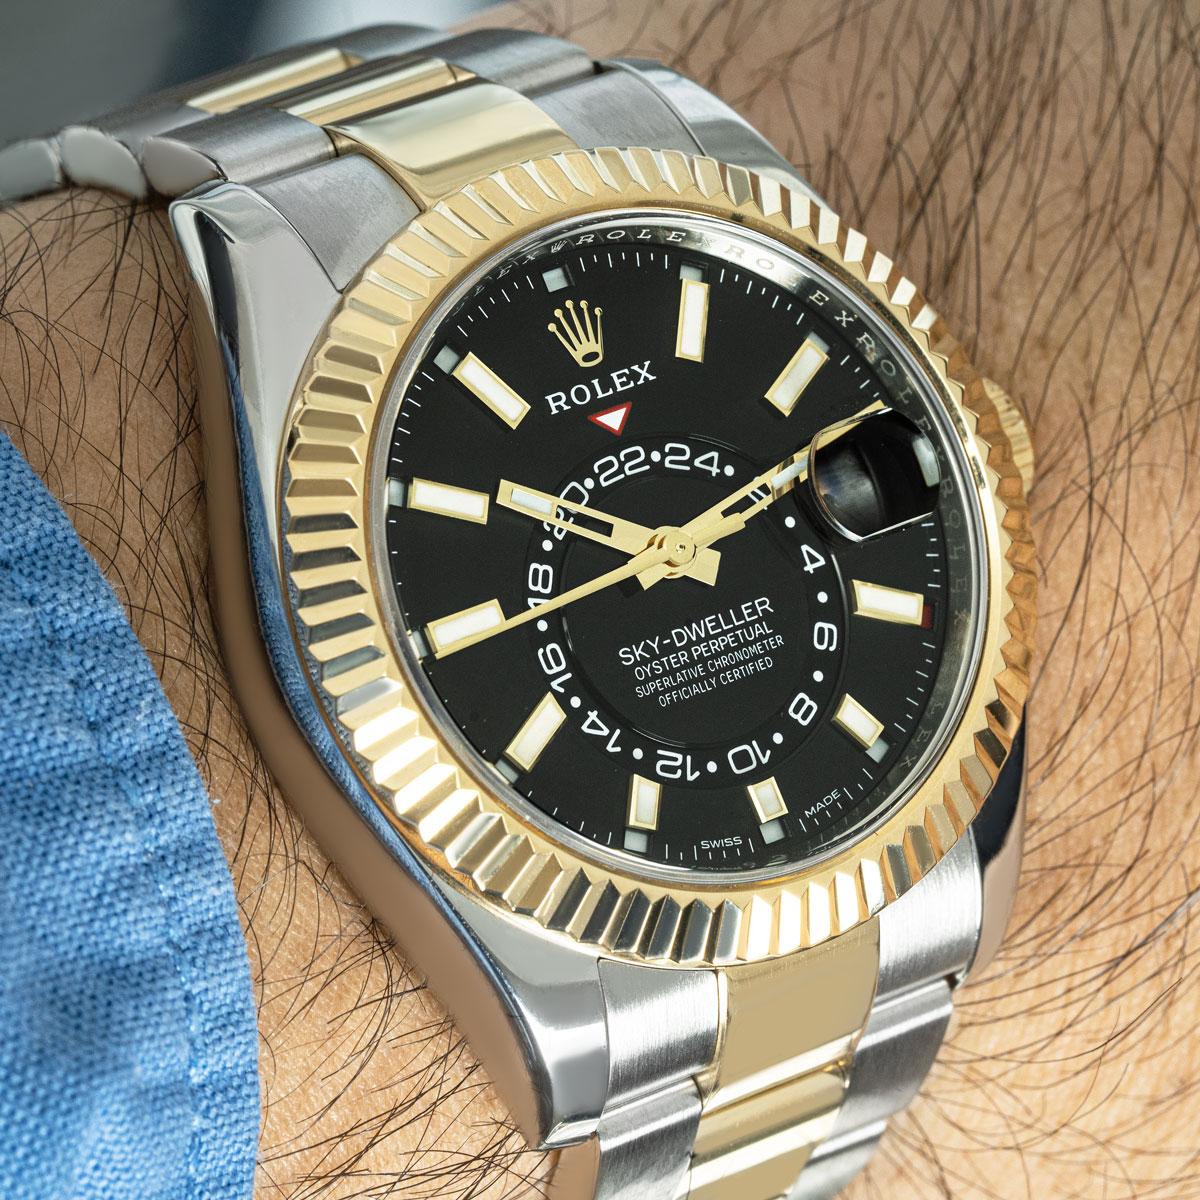 A Sky-Dweller in Oystersteel and yellow gold by Rolex. Featuring a black dial with the date indicator, a month display via the 12 apertures, a 24 hour display, and a second time zone which can be set using the fluted yellow gold bidirectional